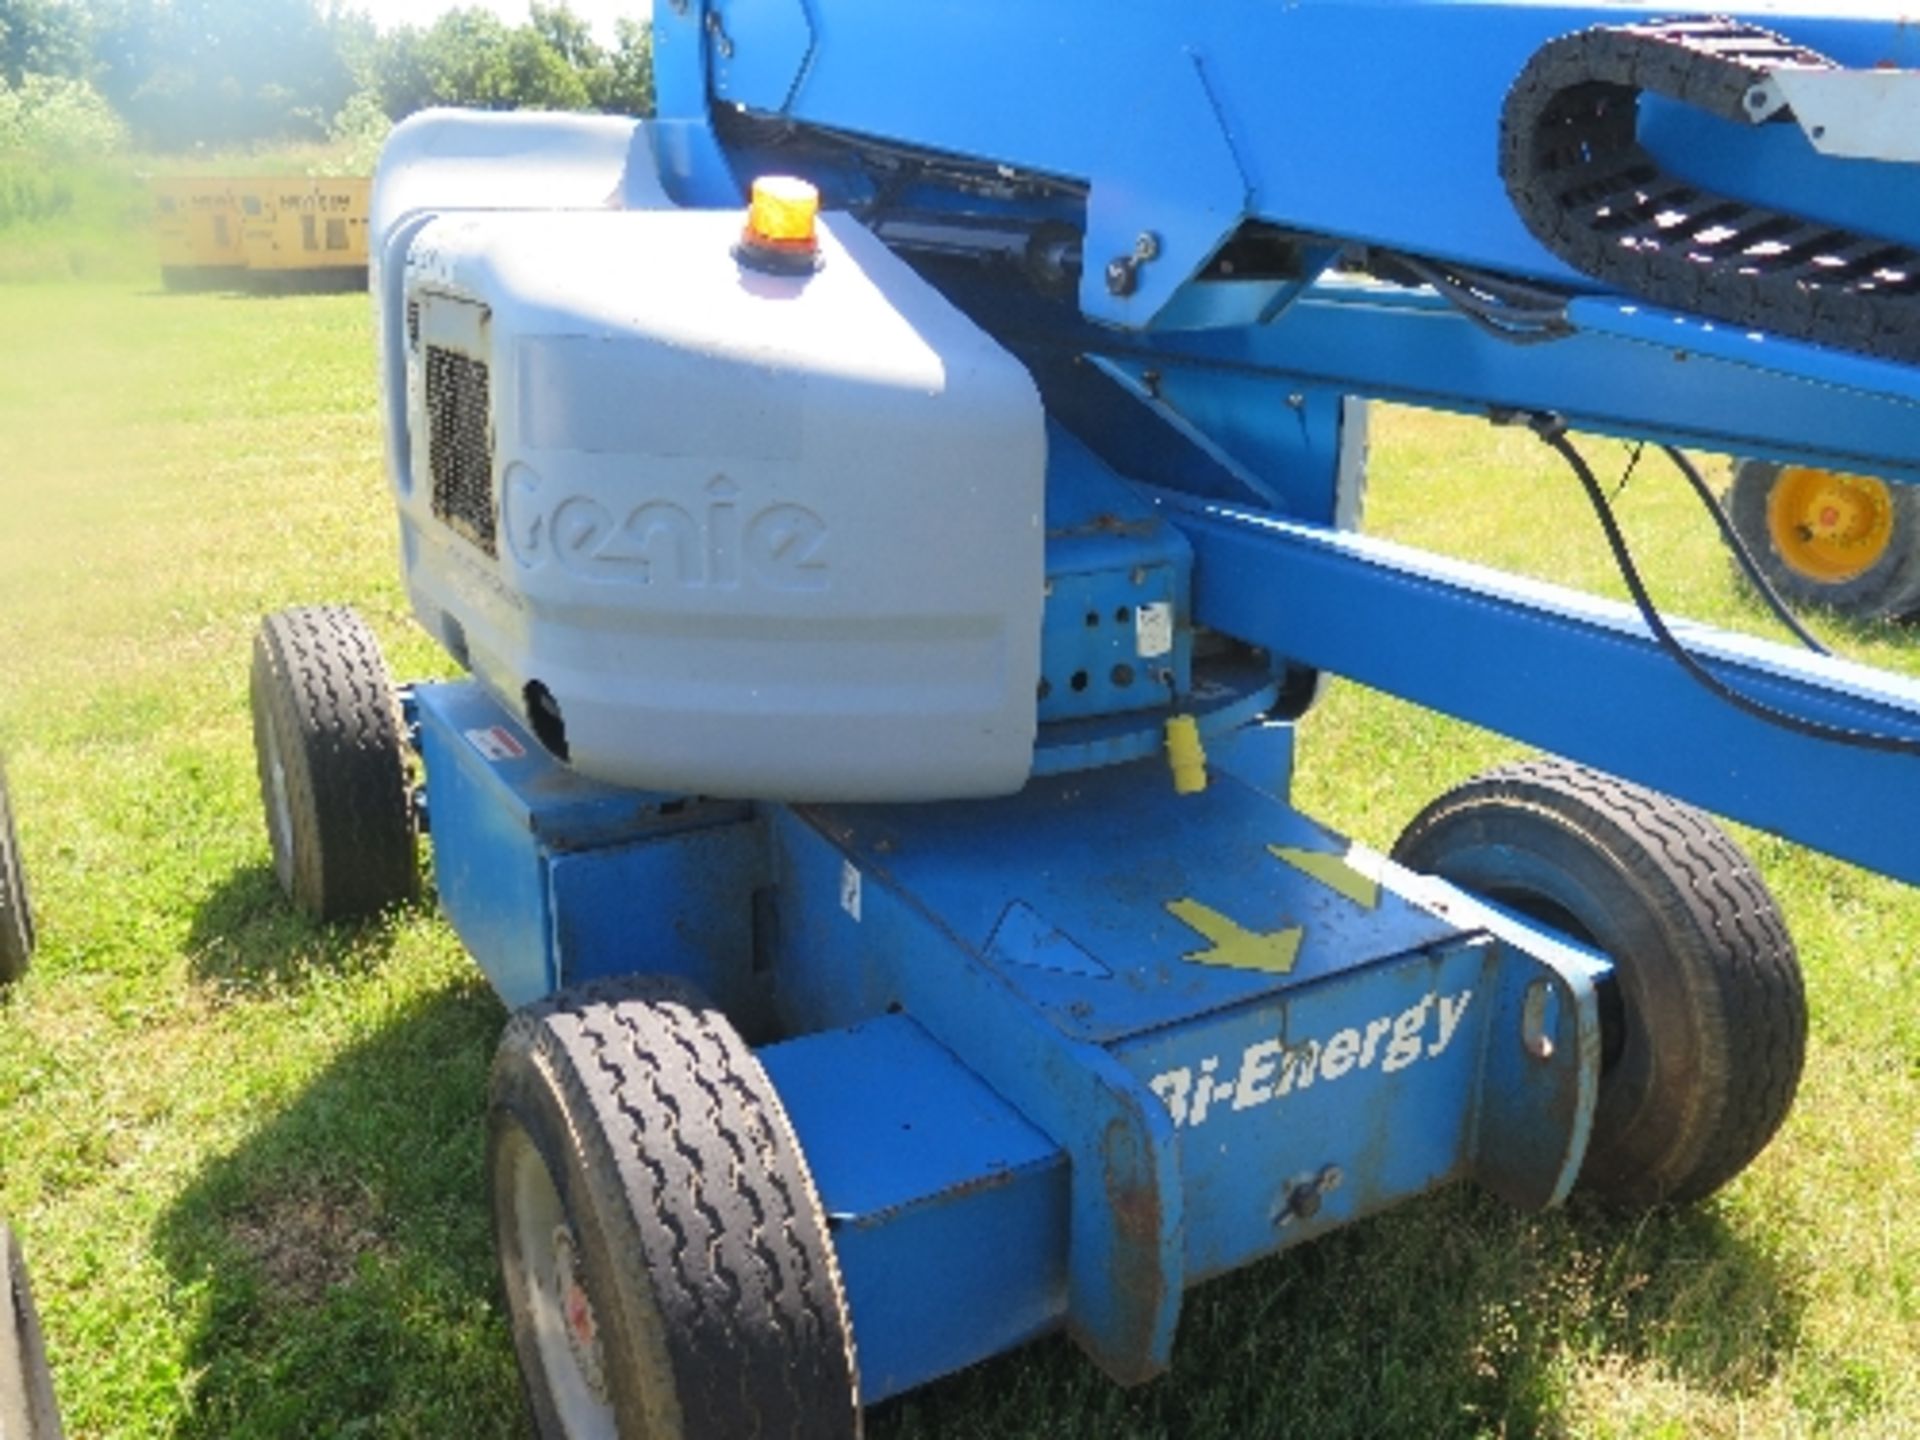 Genie Z45/25 Bi-fuel artic boom boom 811 hrs 2006 152018ALL LOTS are SOLD AS SEEN WITHOUT WARRANTY - Image 3 of 6